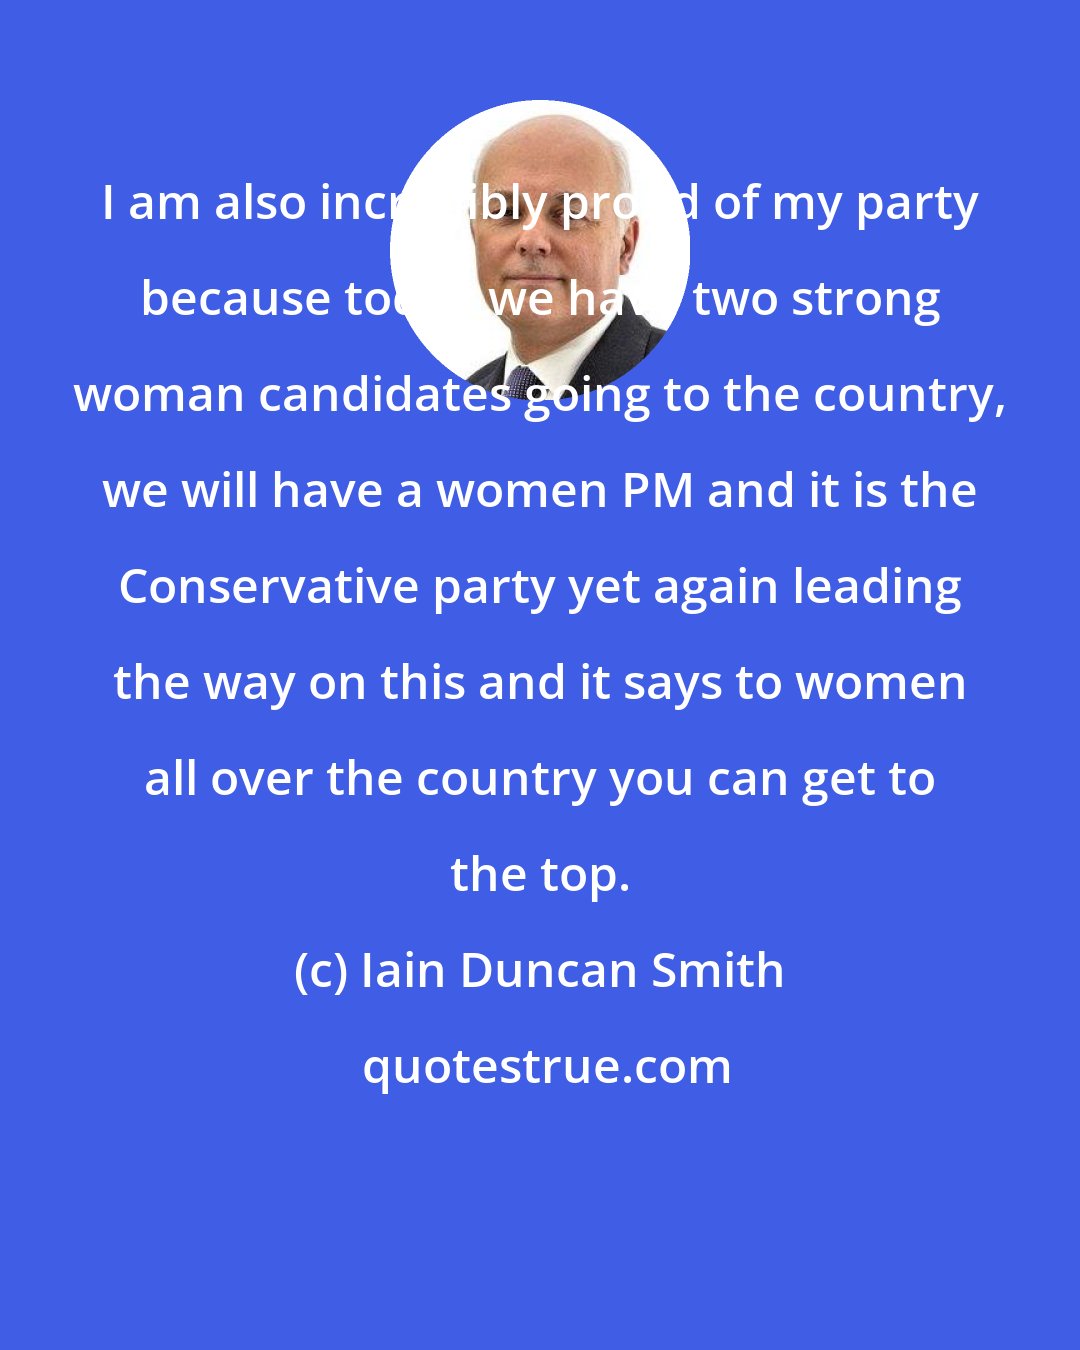 Iain Duncan Smith: I am also incredibly proud of my party because today we have two strong woman candidates going to the country, we will have a women PM and it is the Conservative party yet again leading the way on this and it says to women all over the country you can get to the top.